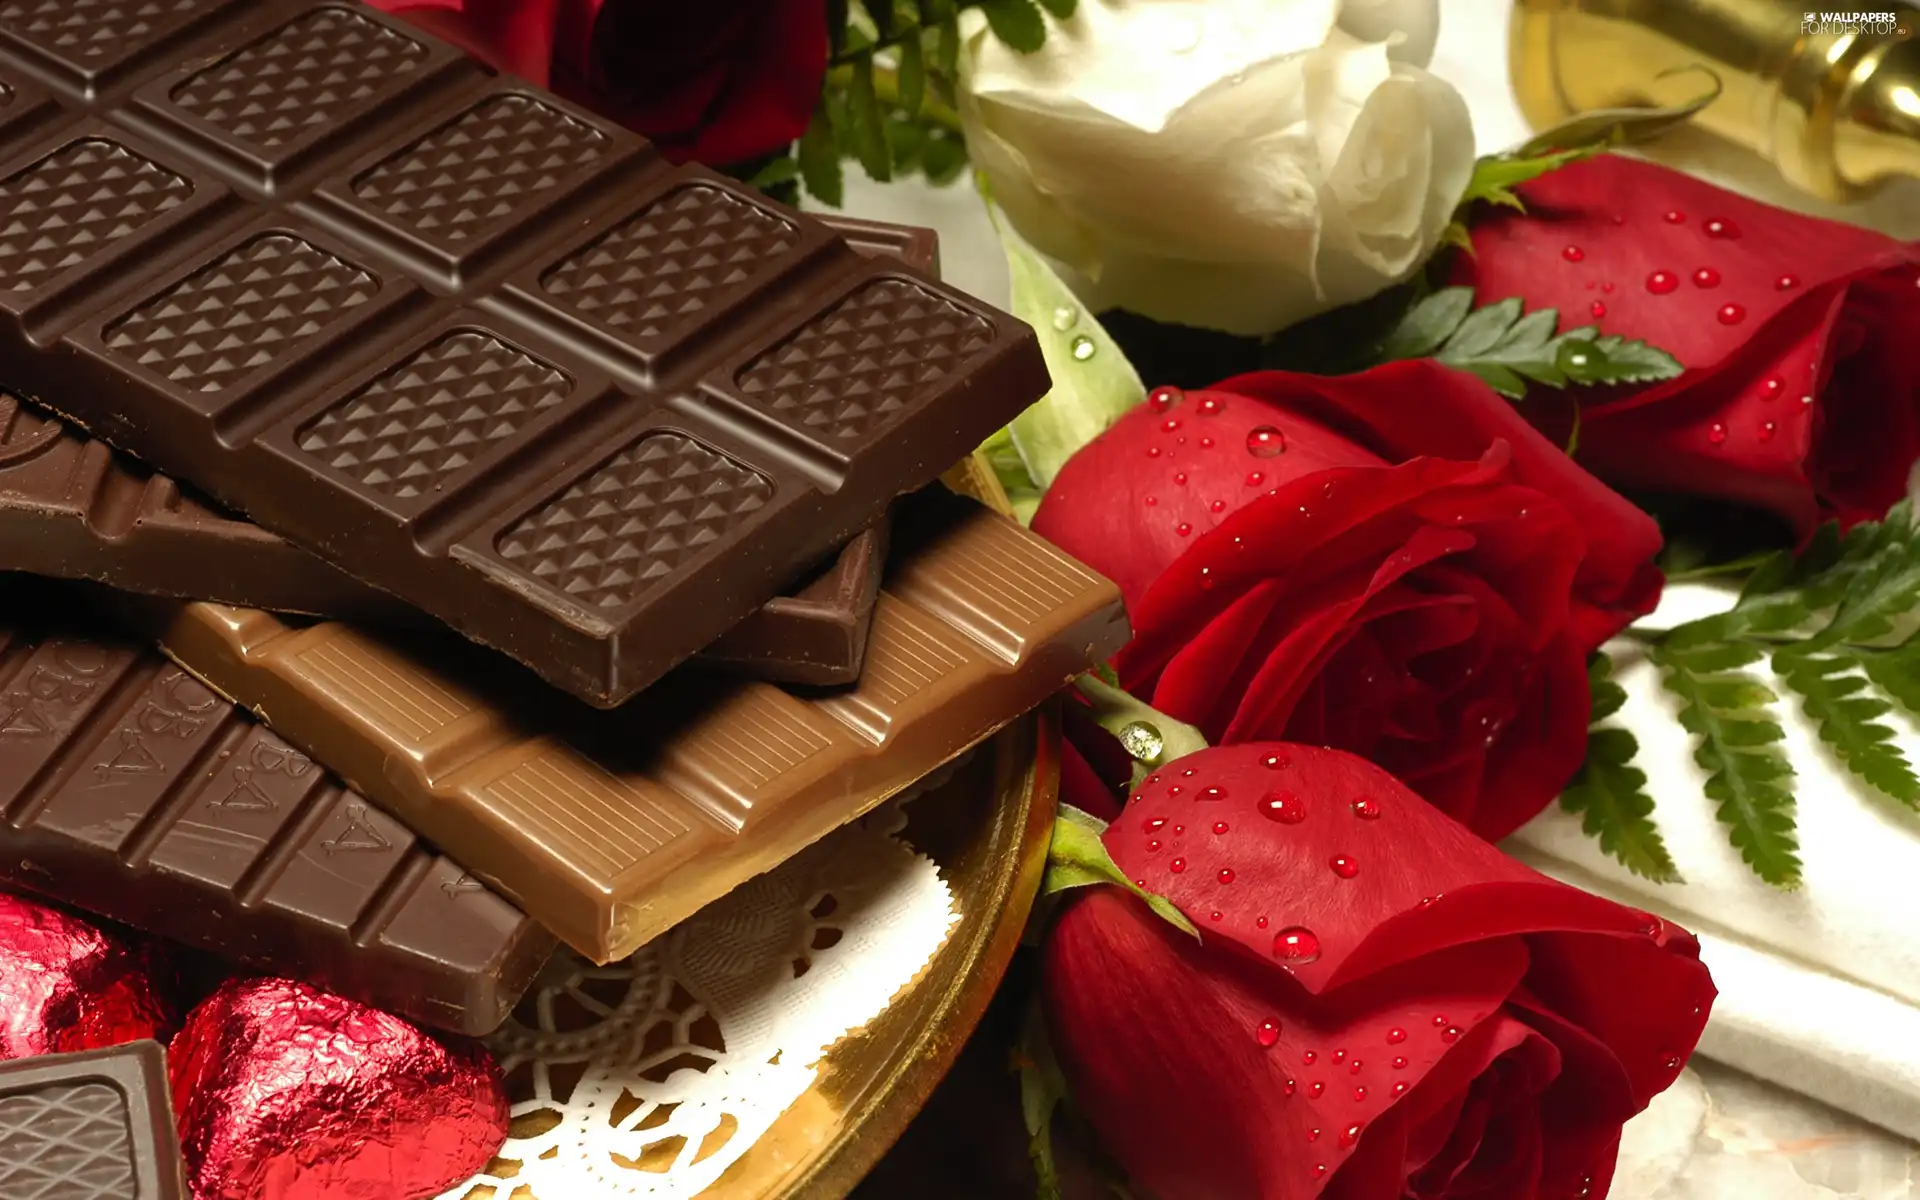 Red, roses, chocolate, White